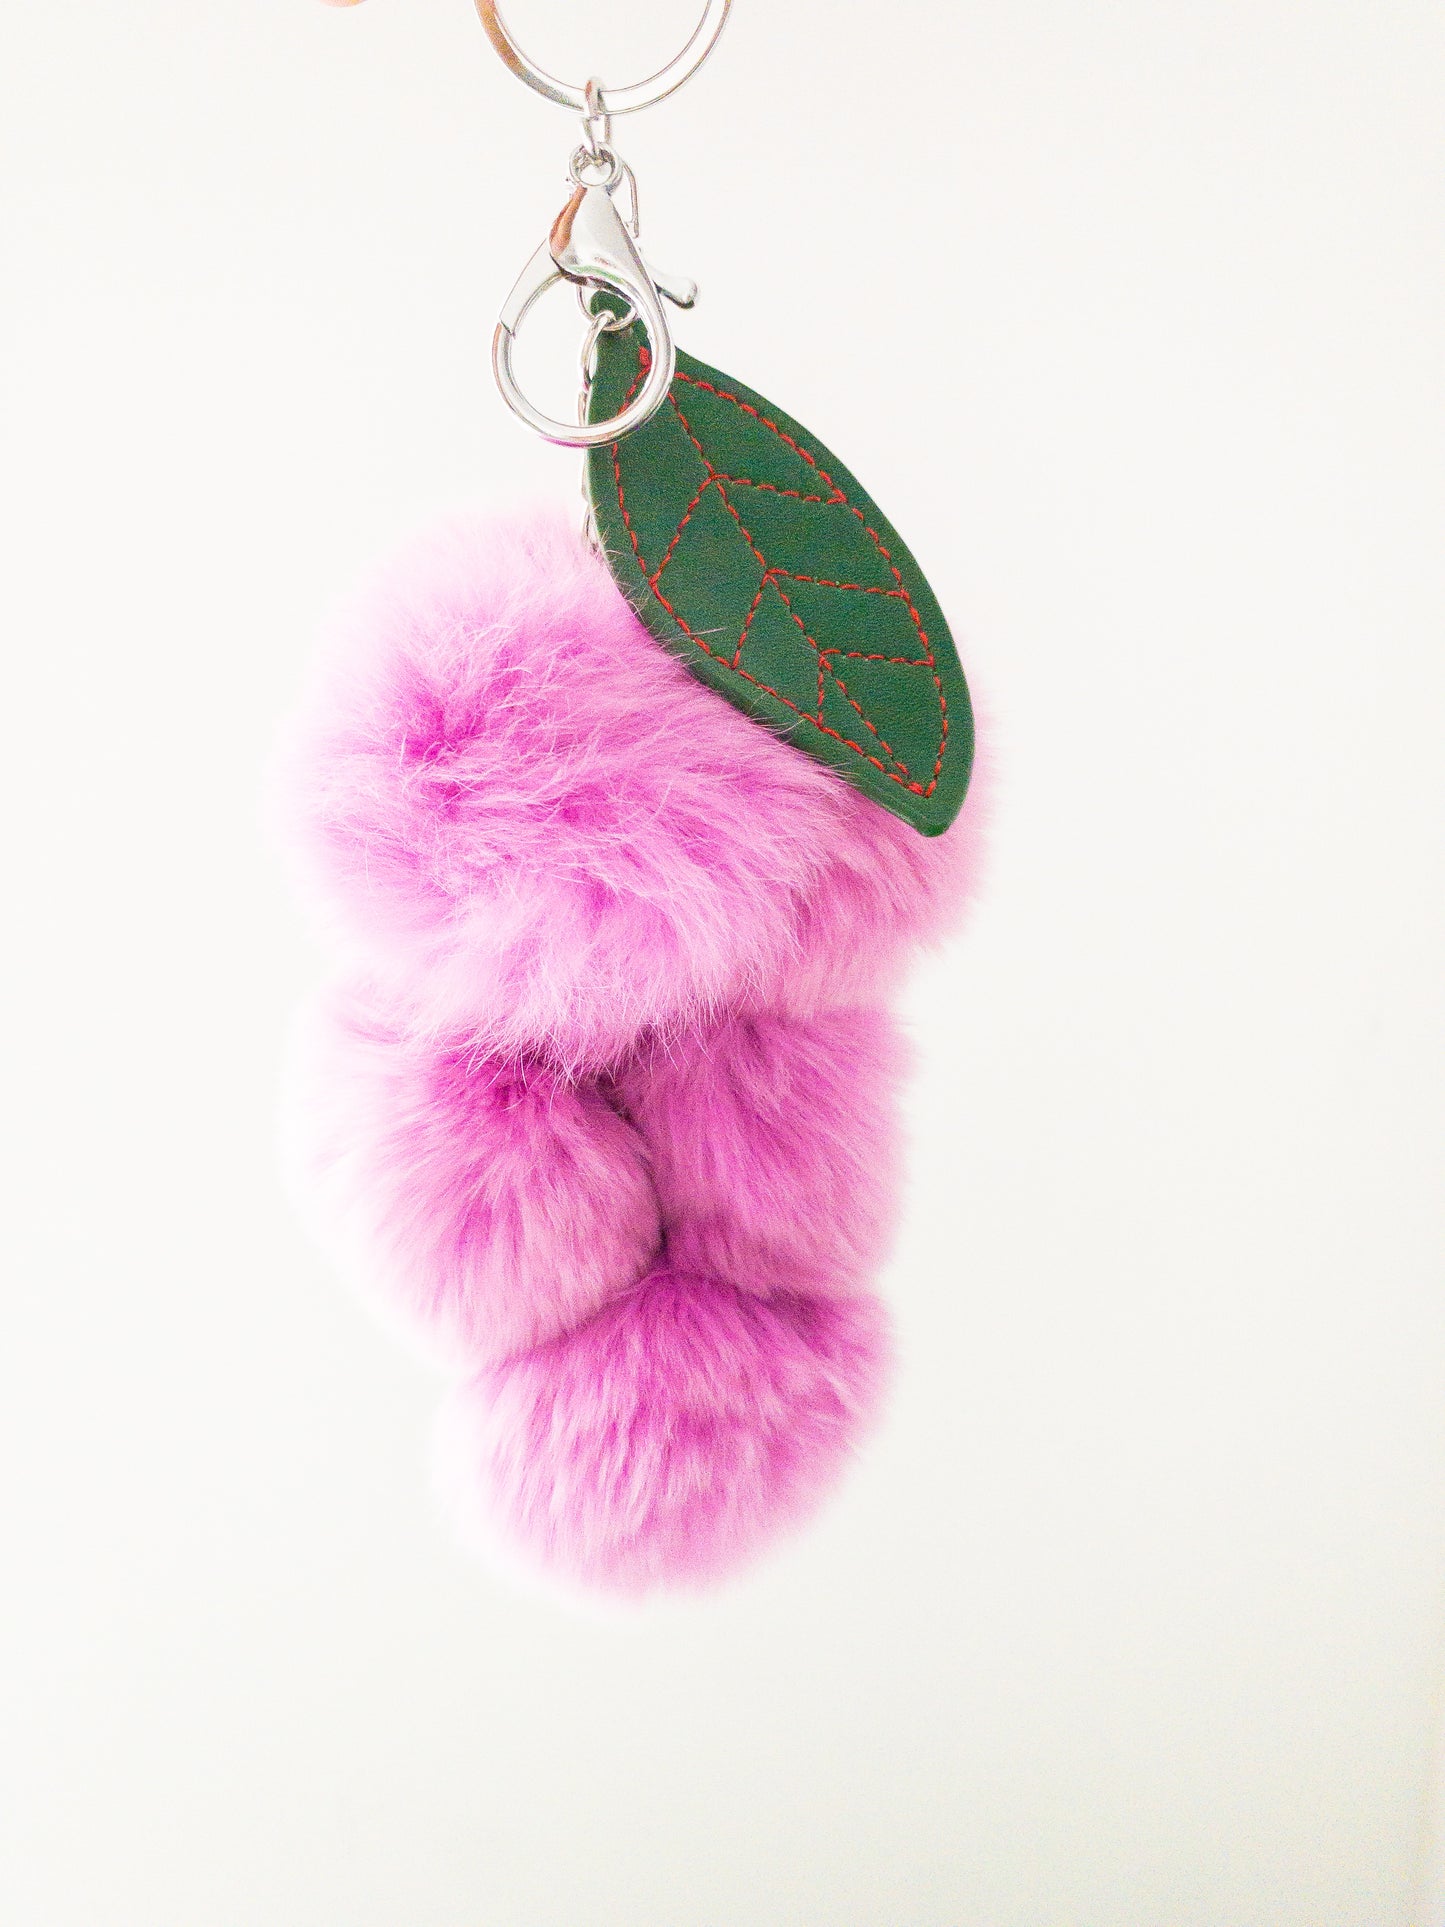 Add a pop of fun to your keys with this super soft grape keychain! The faux rabbit fur is addictively soft and strung together on a chain with a vegan leather grape petal. Clip onto your purse or backpack or attach your keys, making them easy to find at the bottom of your bag.